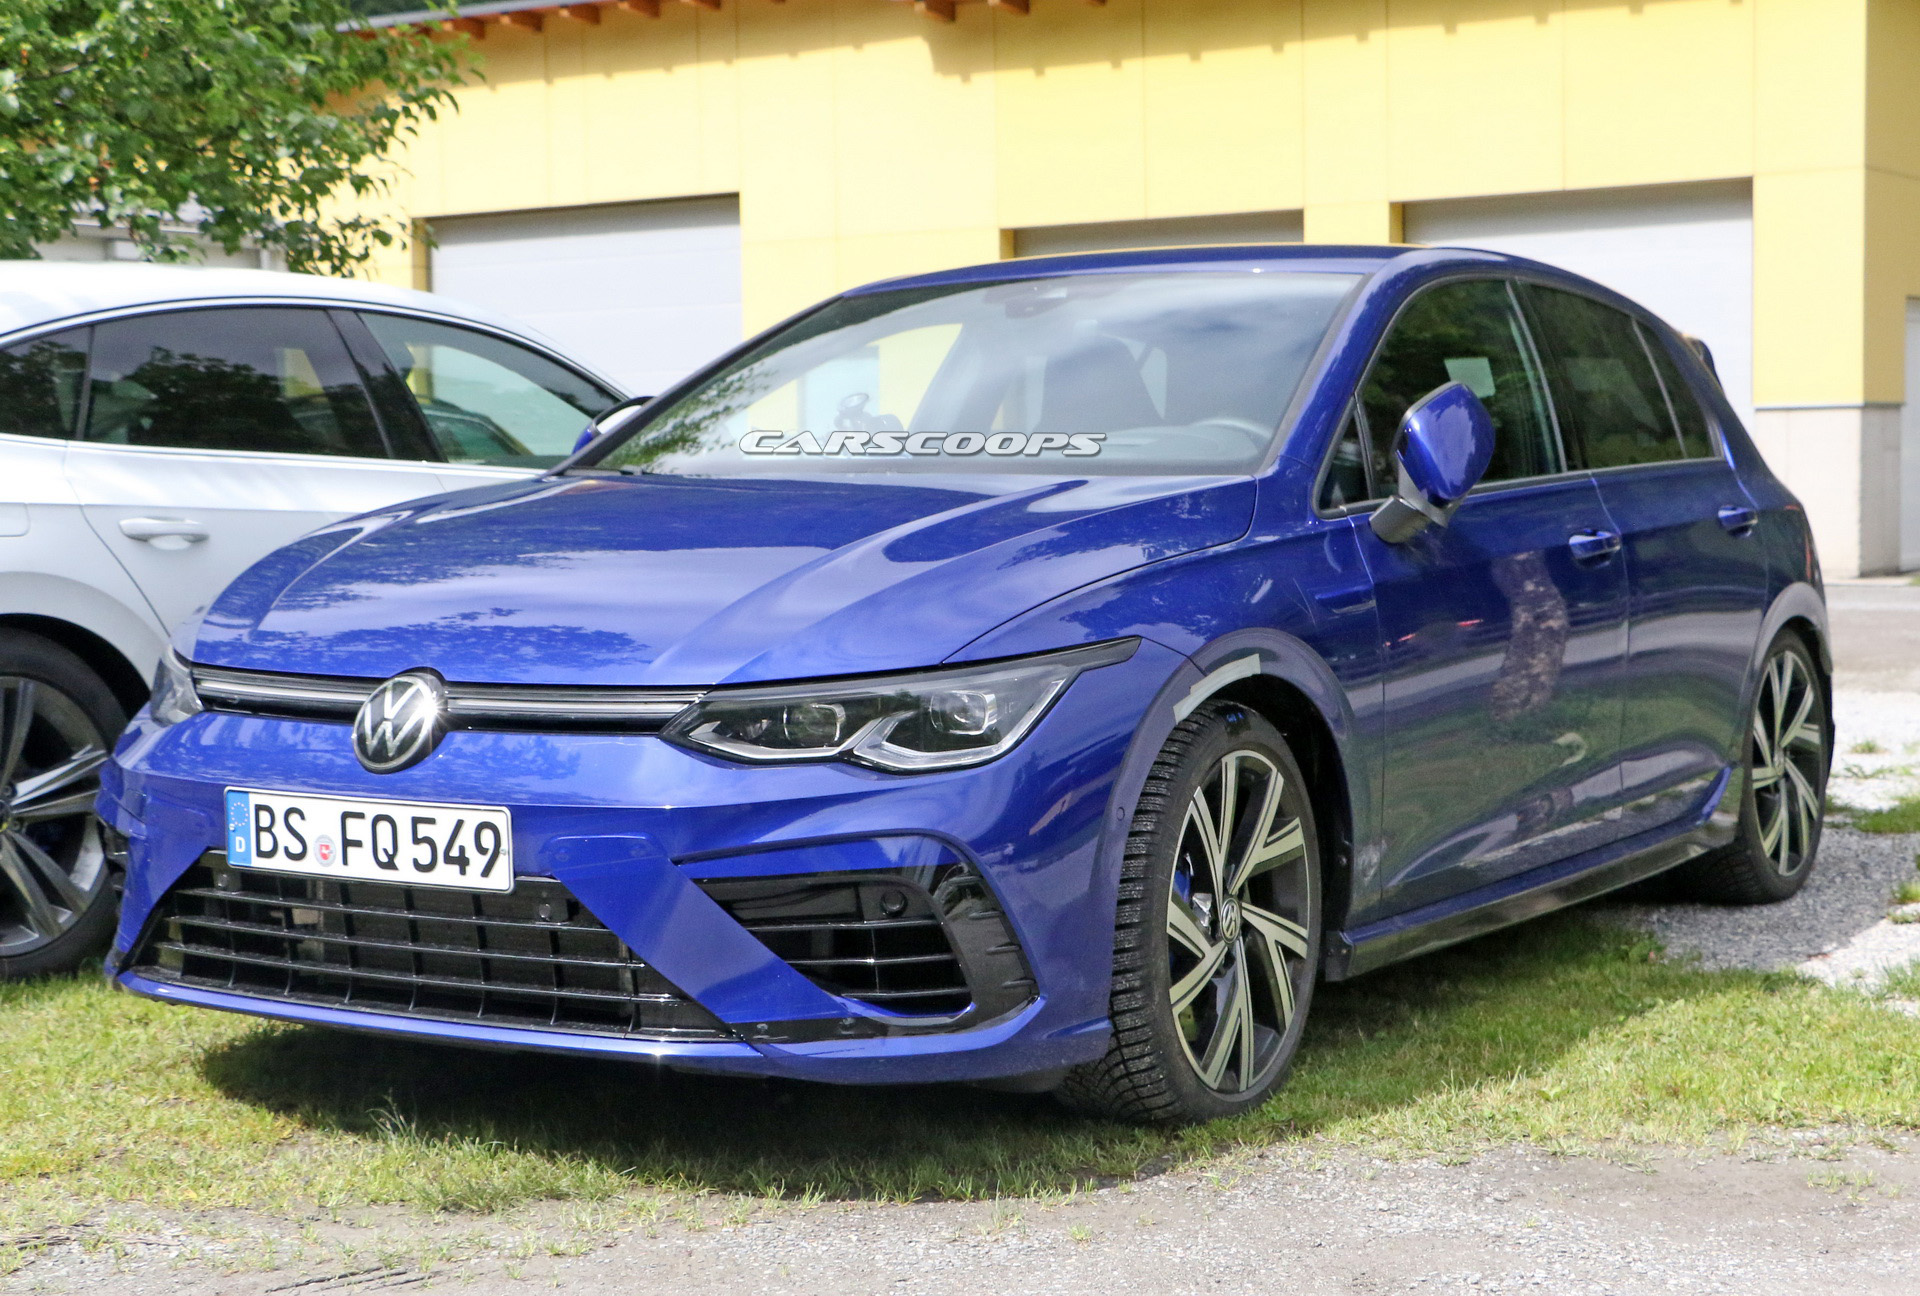 2021 VW Golf R Caught Undisguised, Hot Hatch Could Have Around 328